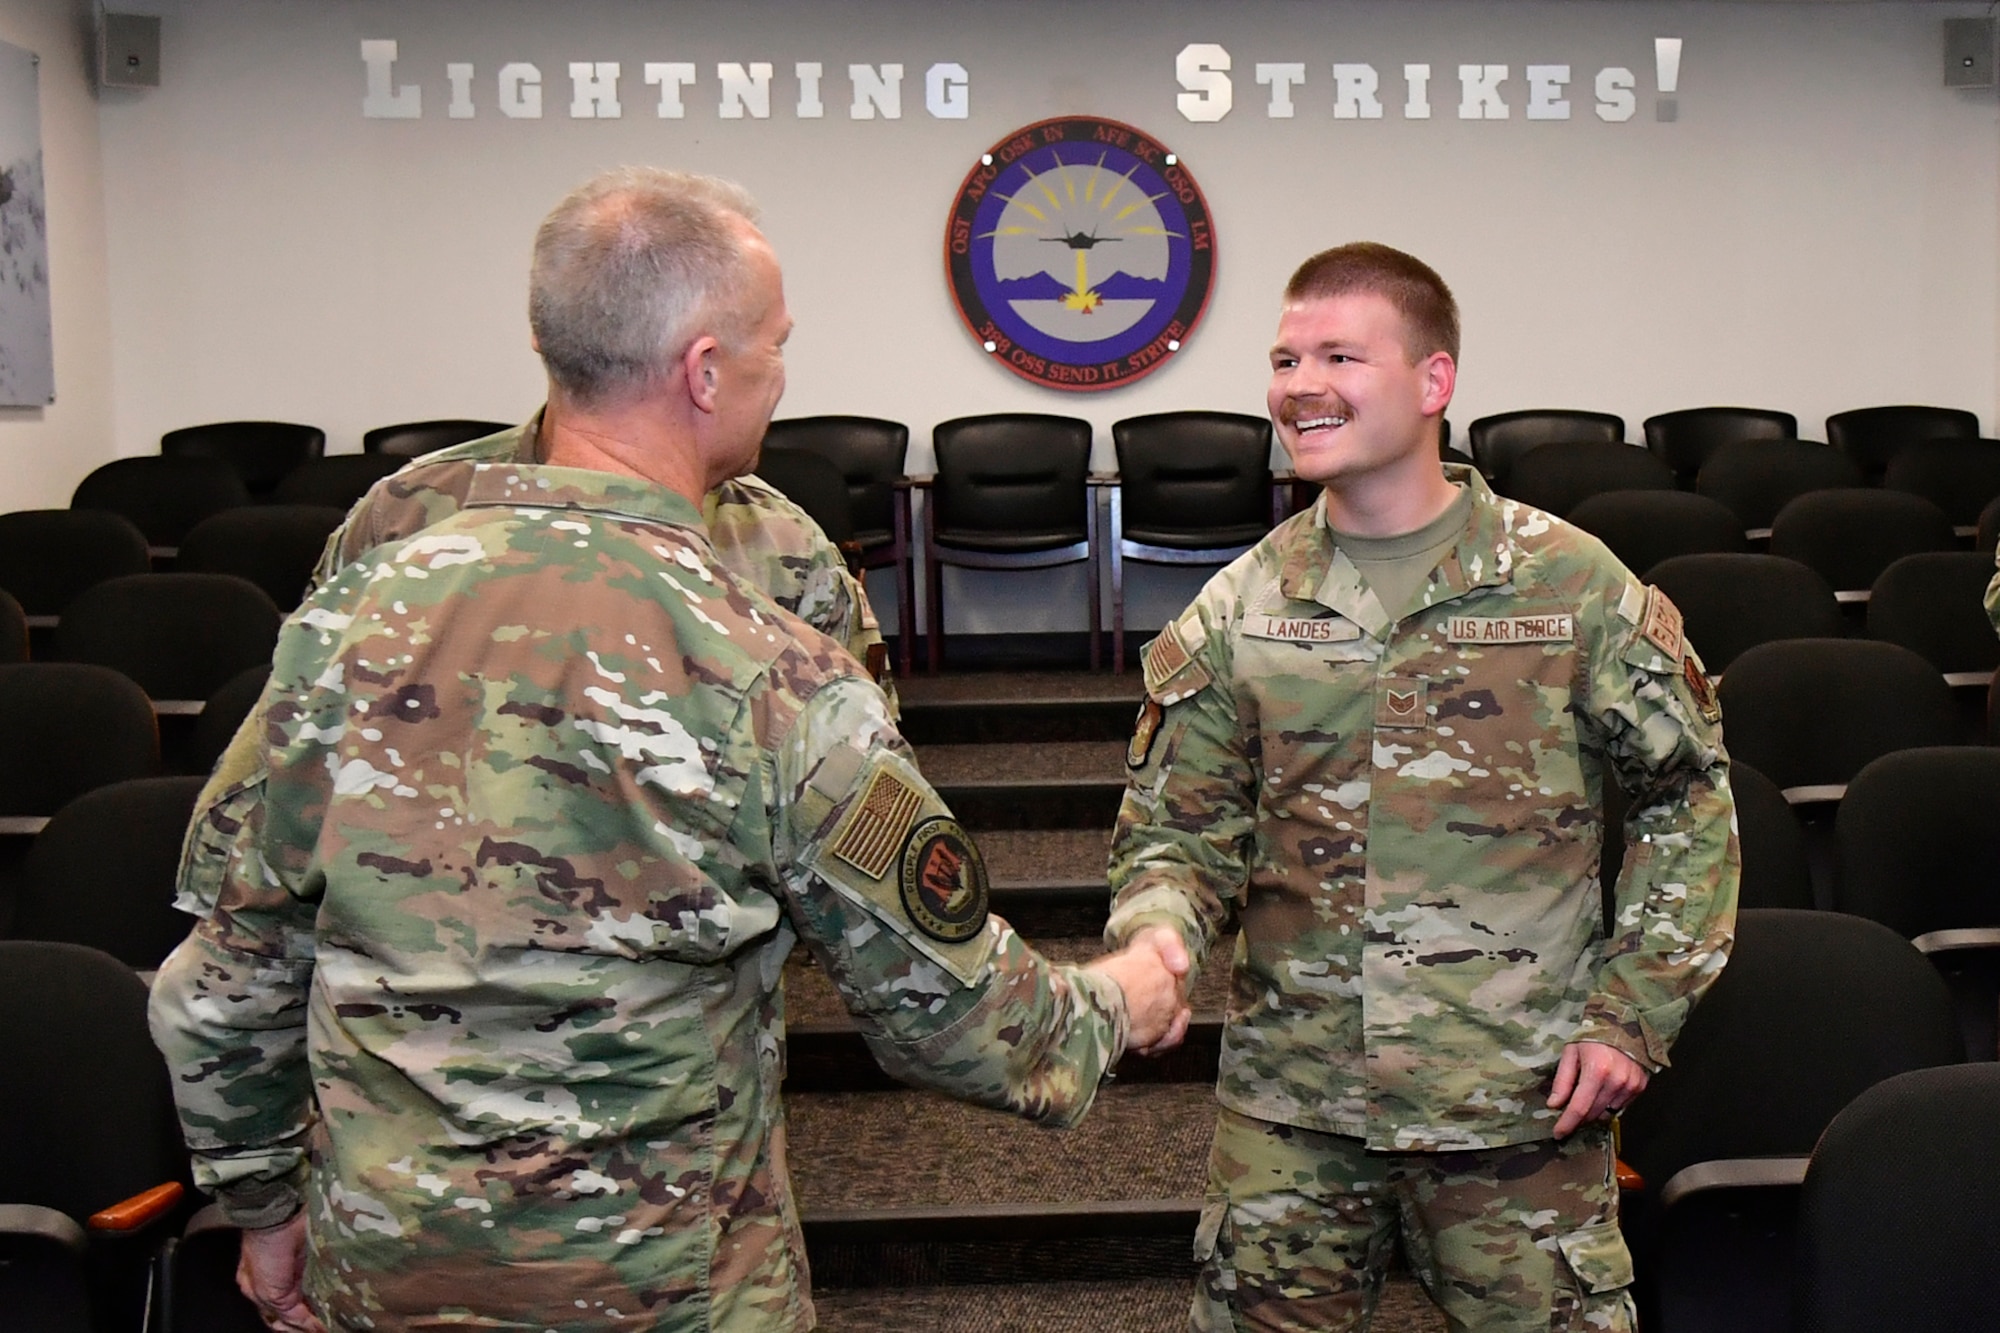 Staff Sgt. Luke Landes (right), 388th Maintenance Squadron, shakes hands with Gen. Mark D. Kelly, Air Combat Command commander.